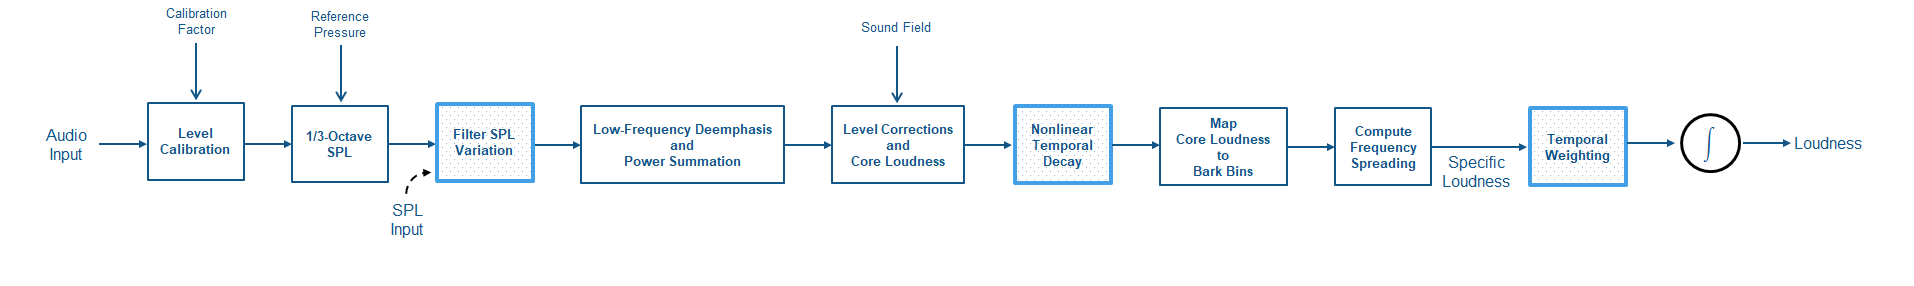 Audio passes through the following stages: level calibration, conversion to 1/3-Octave SPL, Filtering of SPL variation, low-frequency deemphasis and power summation, level correction and conversion to core loudness, modeling of nonlinear temporal decay, conversion to Bark bins, frequency spreading correction, temporal weighting, and finally integration over the specific loudness.